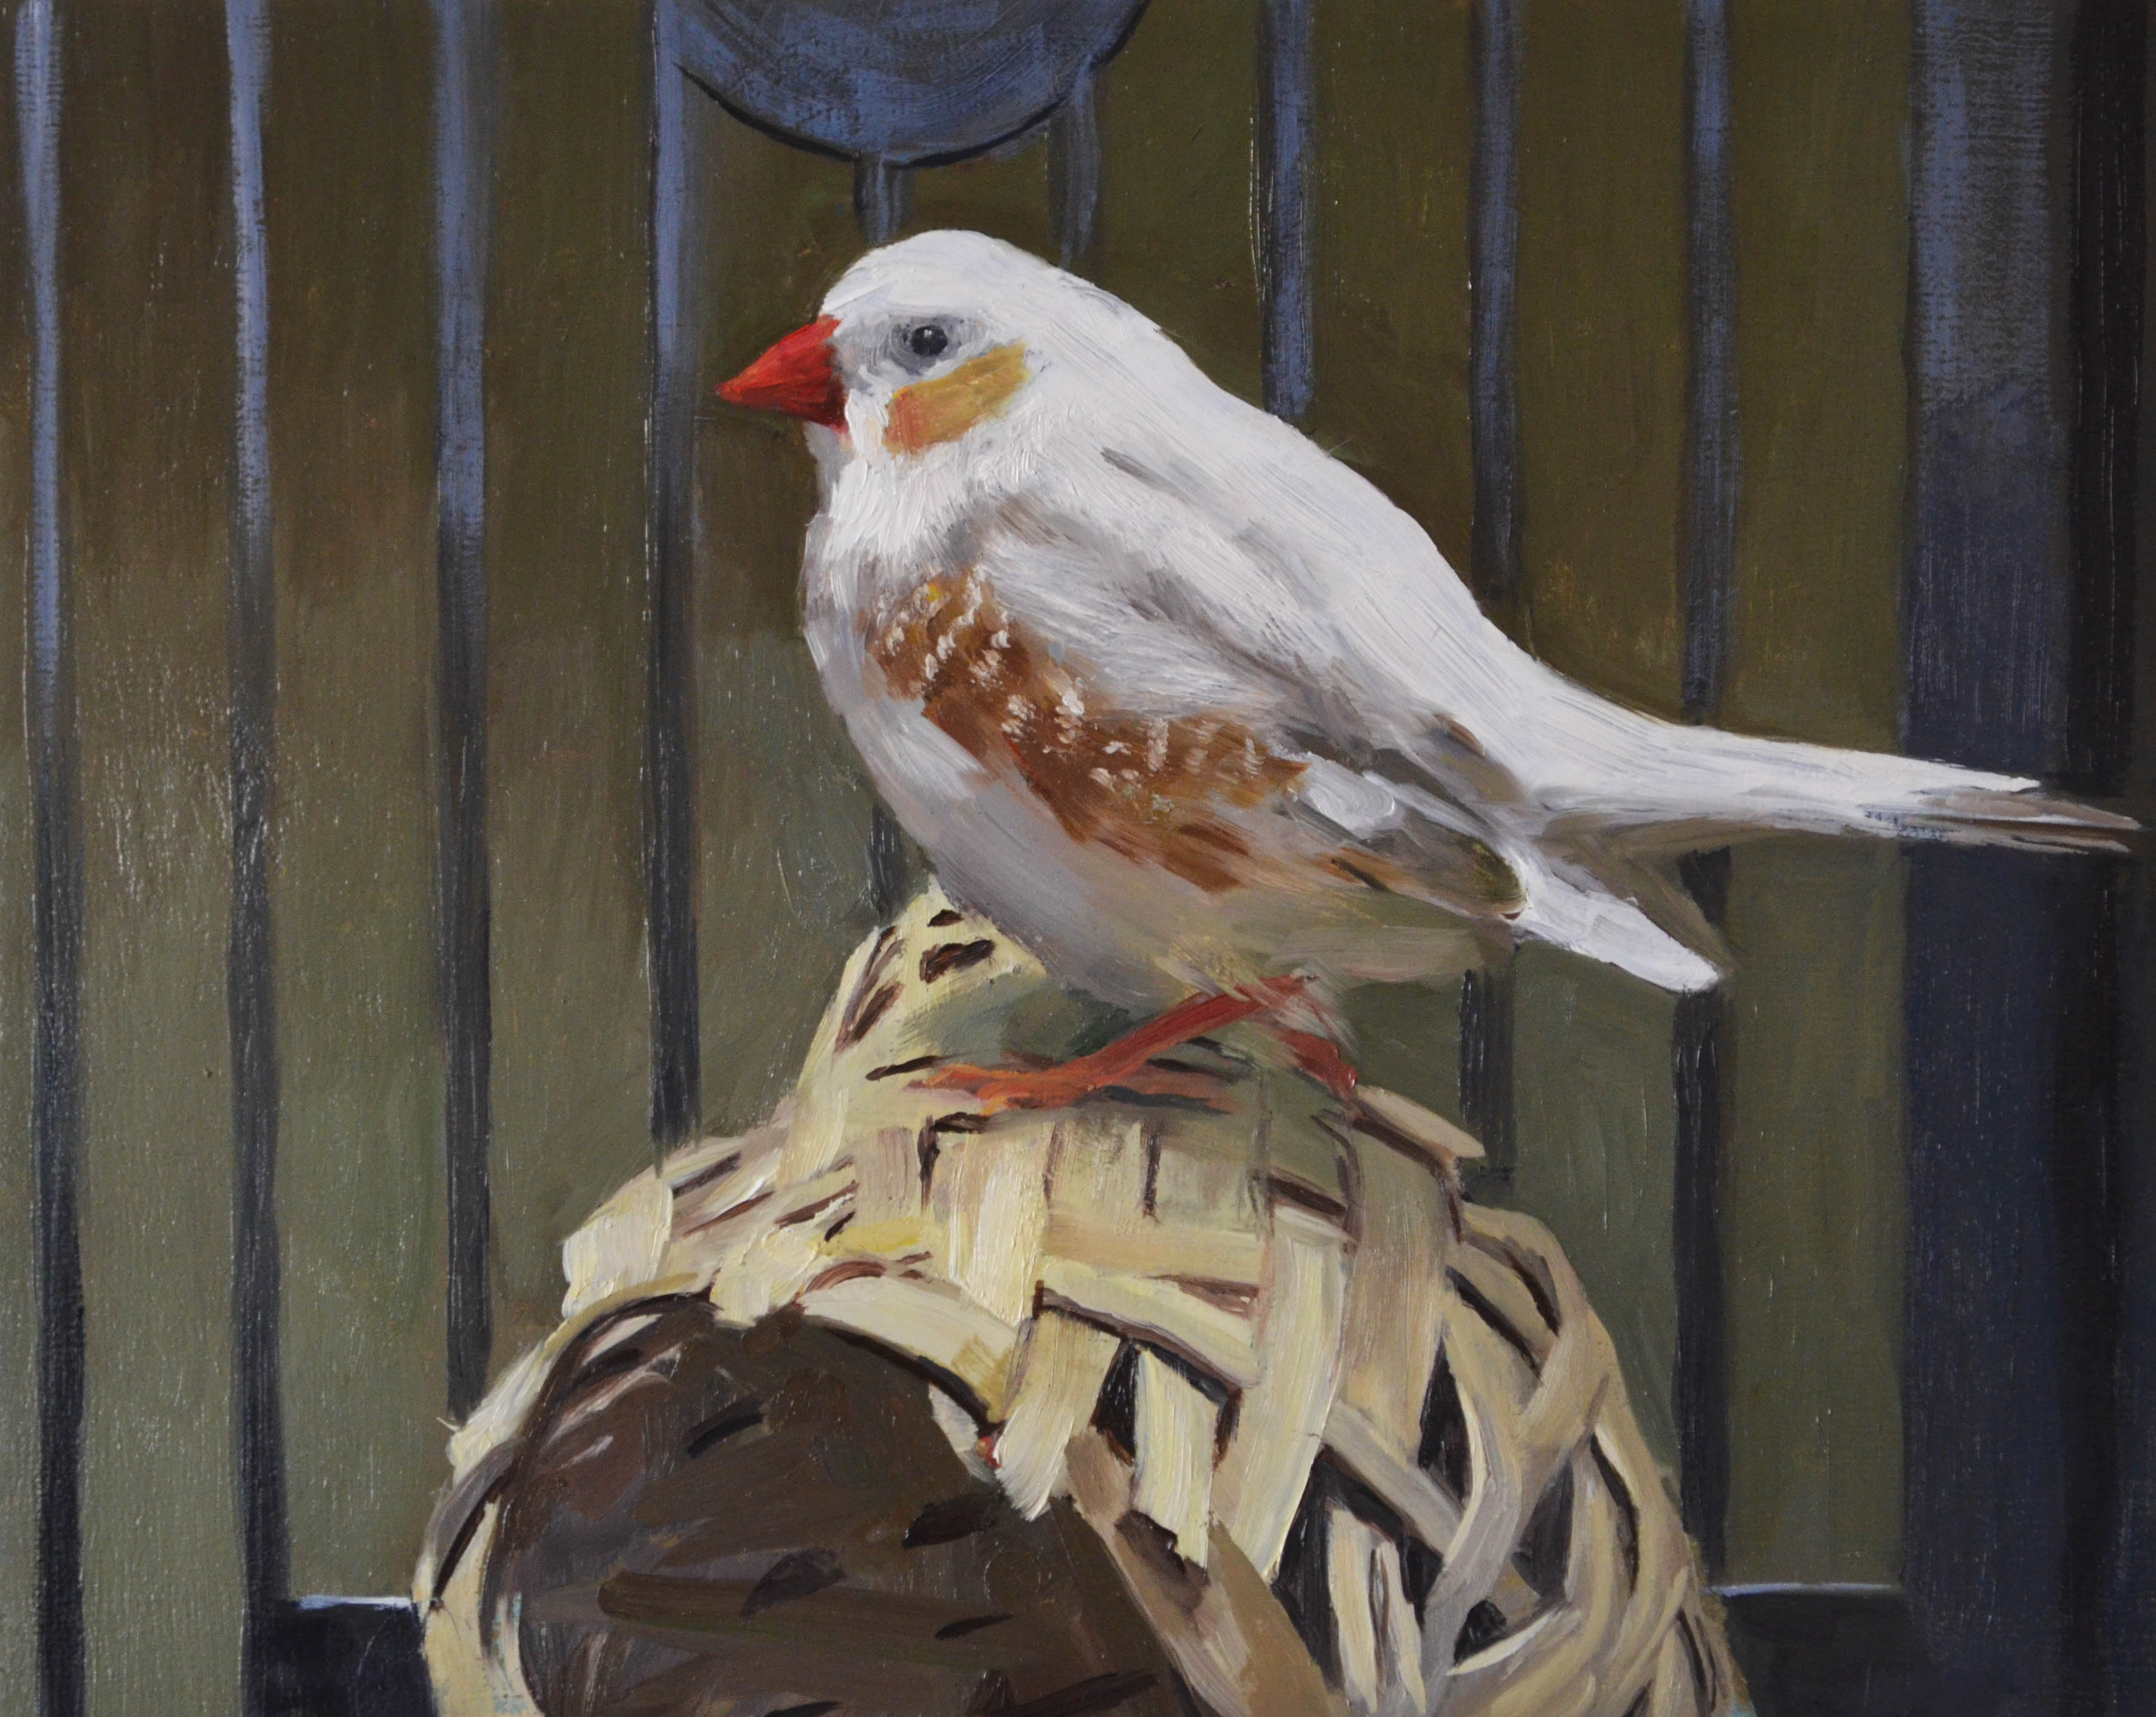 The Finch, oil on panel, 8" x 10", 2017.